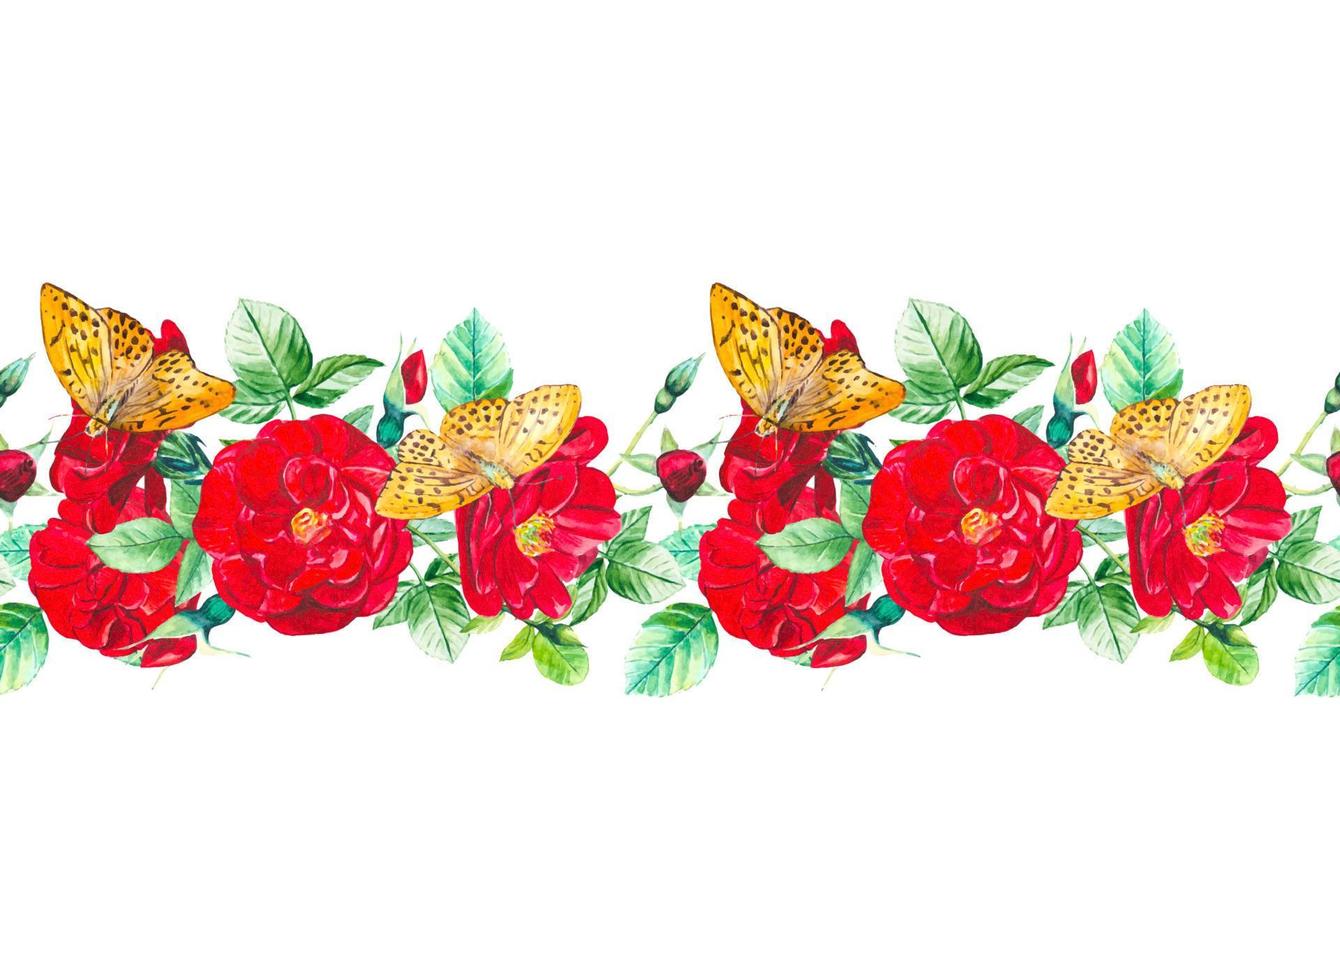 Seamless border of red rose buds and orange butterflies. vector